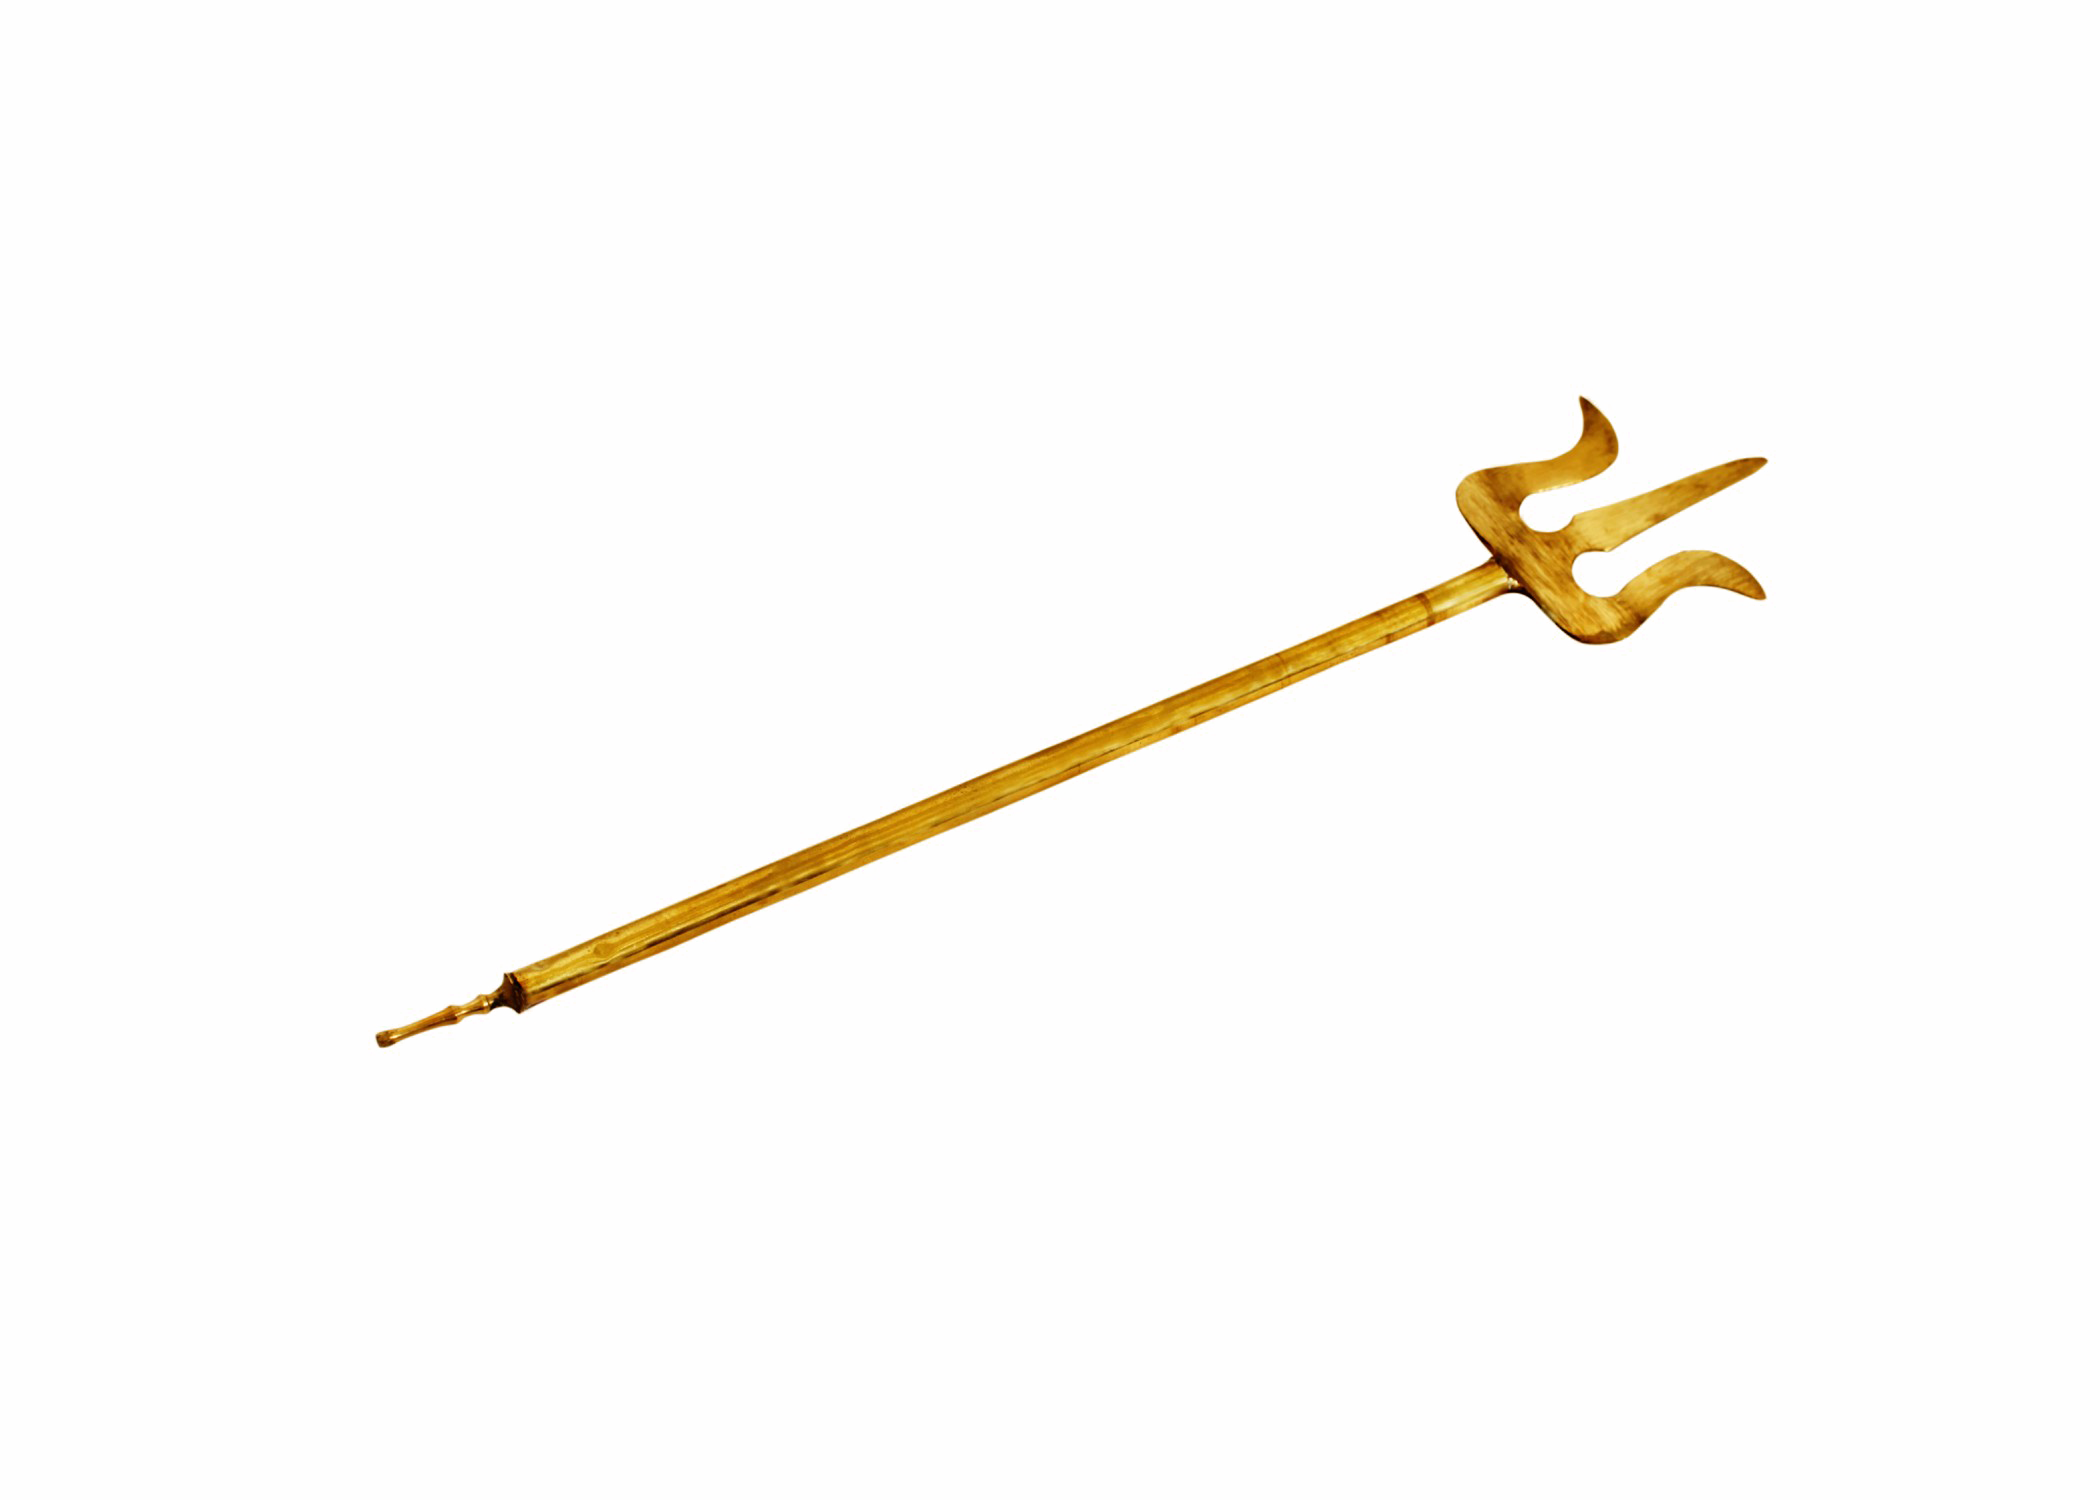 Gold Trident PNG Free Image